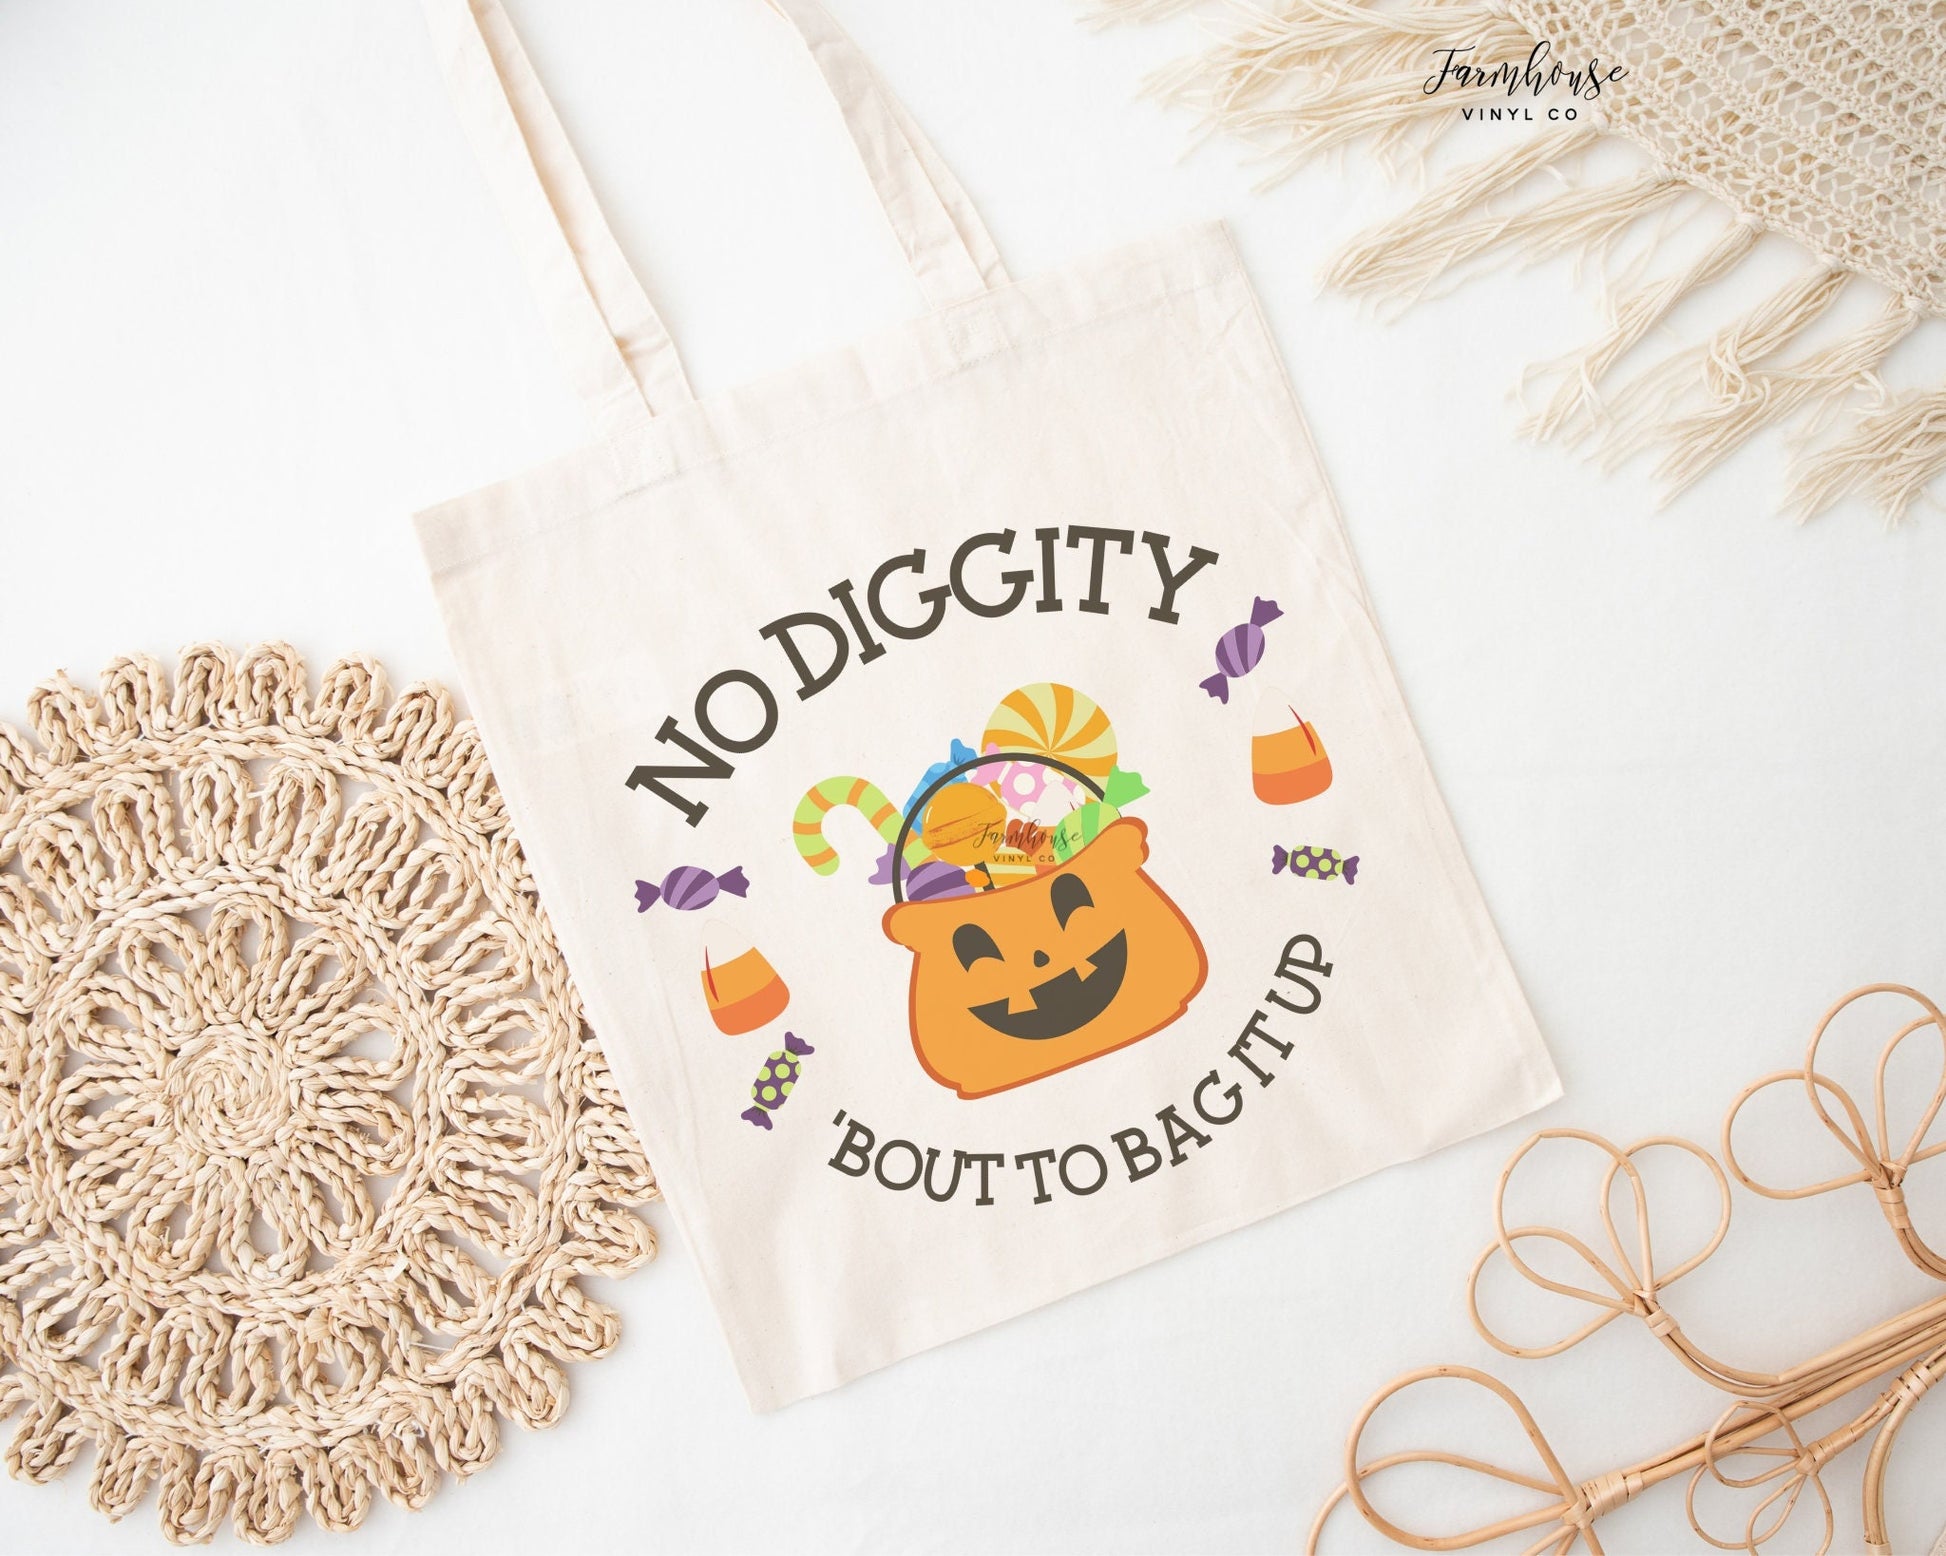 No Diggity Bout to Bag it Up Tote Bag - Farmhouse Vinyl Co